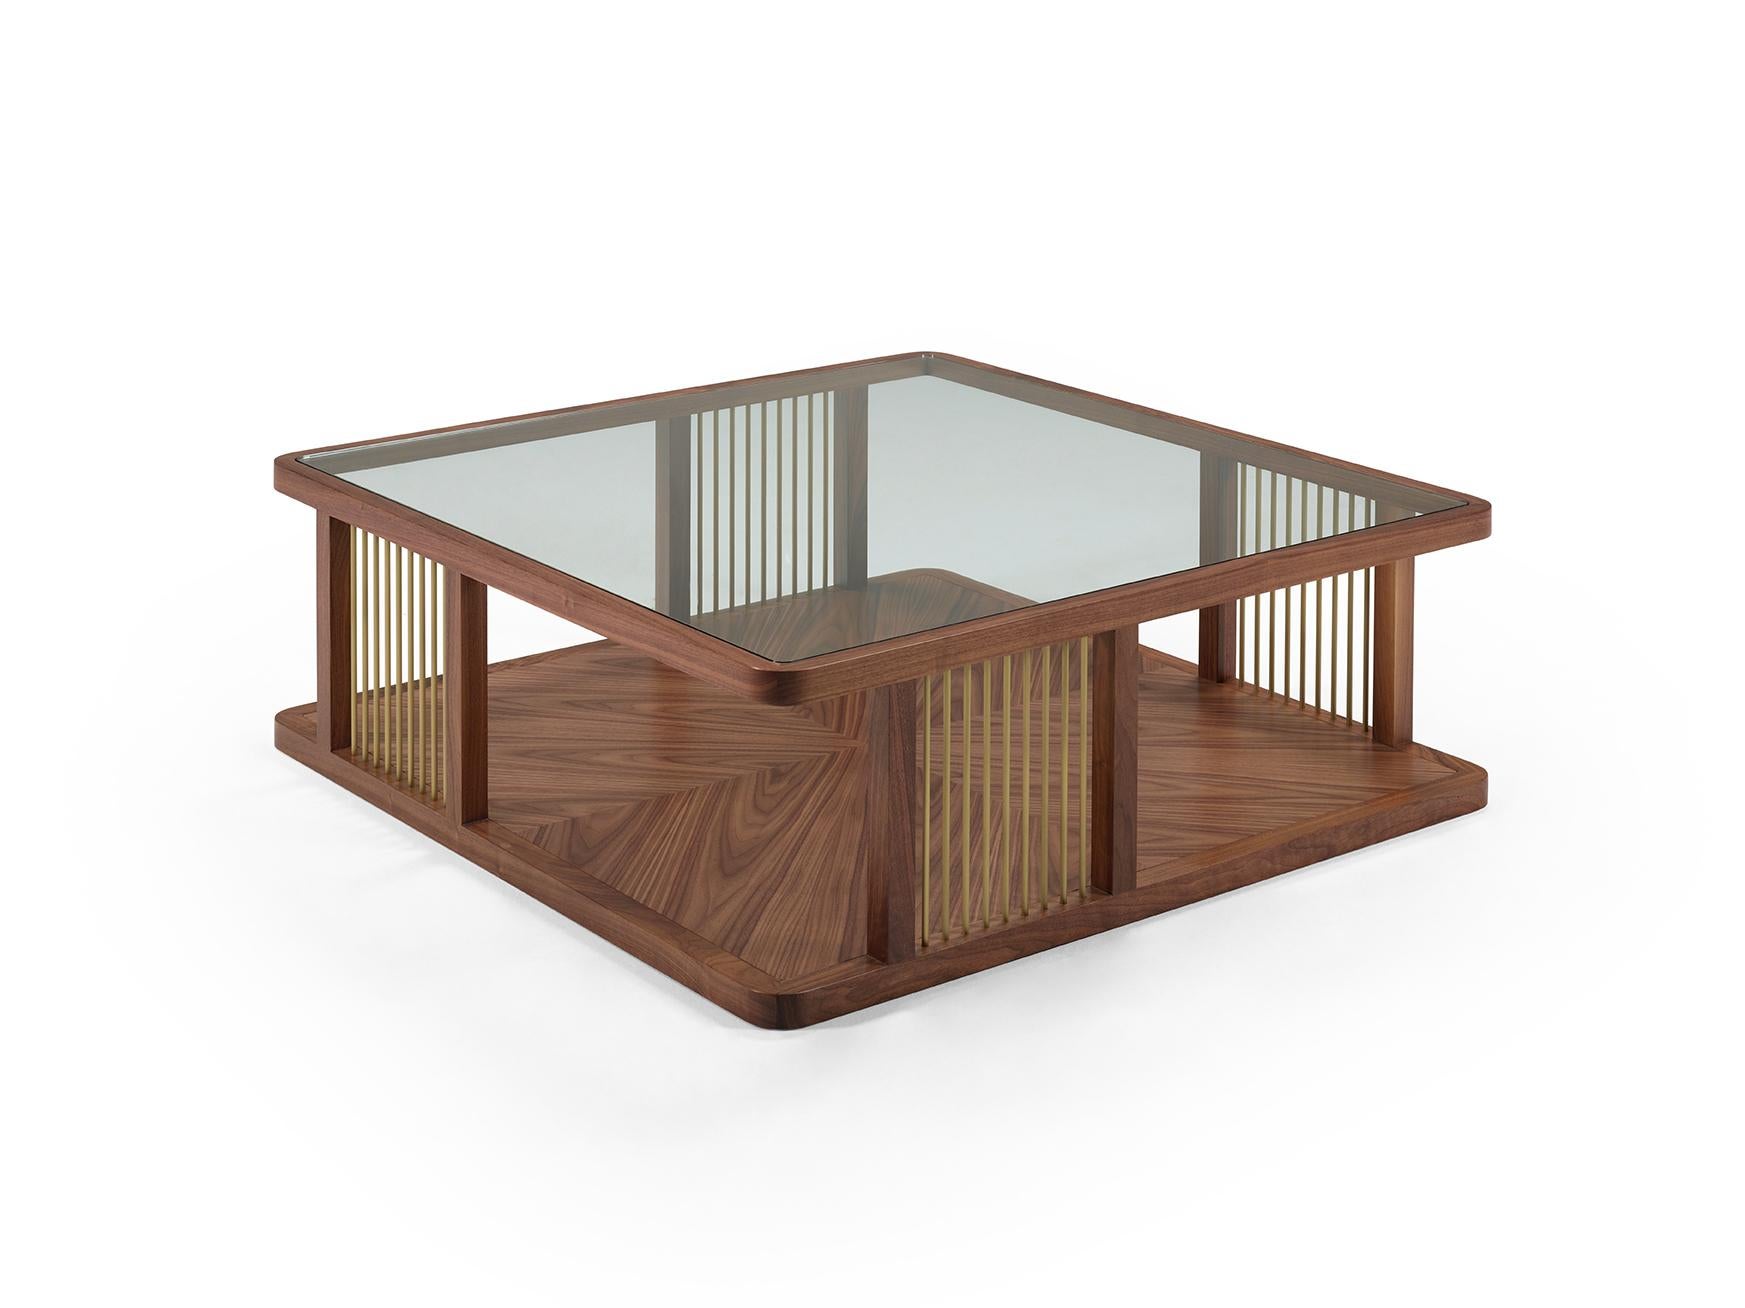 AUDREY is a notable coffee table. The tempered glass top allows the look to the well-gauged base in wood, featuring a play of shapes. The structure is graced by the metal details, in brass or stainless steel, keeping the balanced design. Audrey is